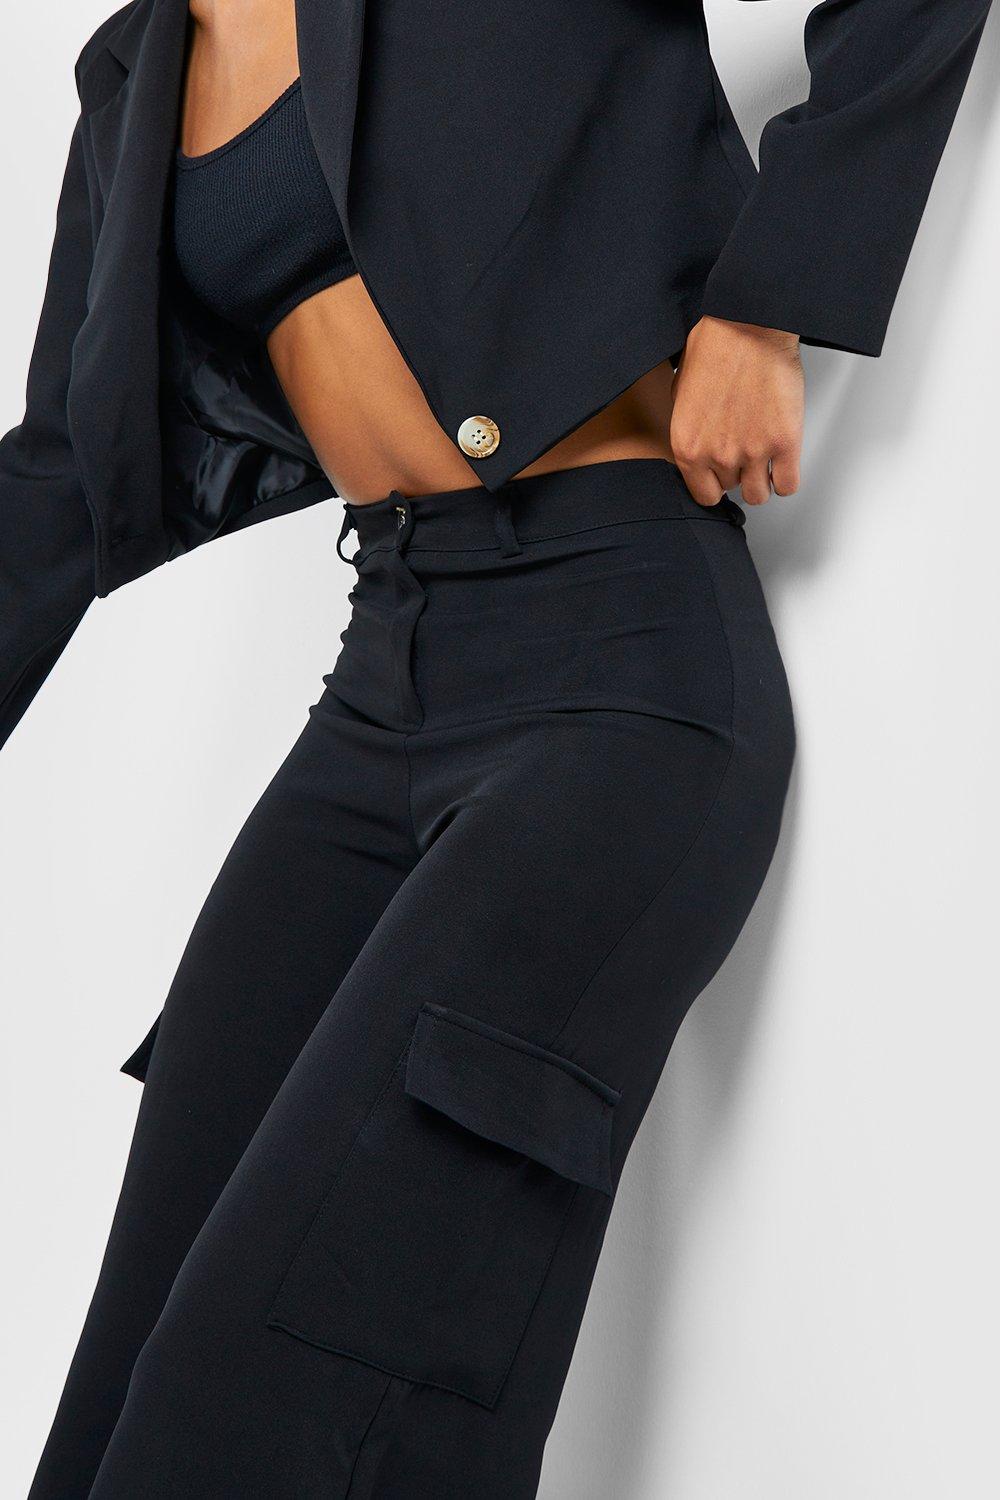 Slacks and Chinos Cargo trousers Boohoo Split Side Tailored Wide Leg Cargo Pants in Black Womens Clothing Trousers 